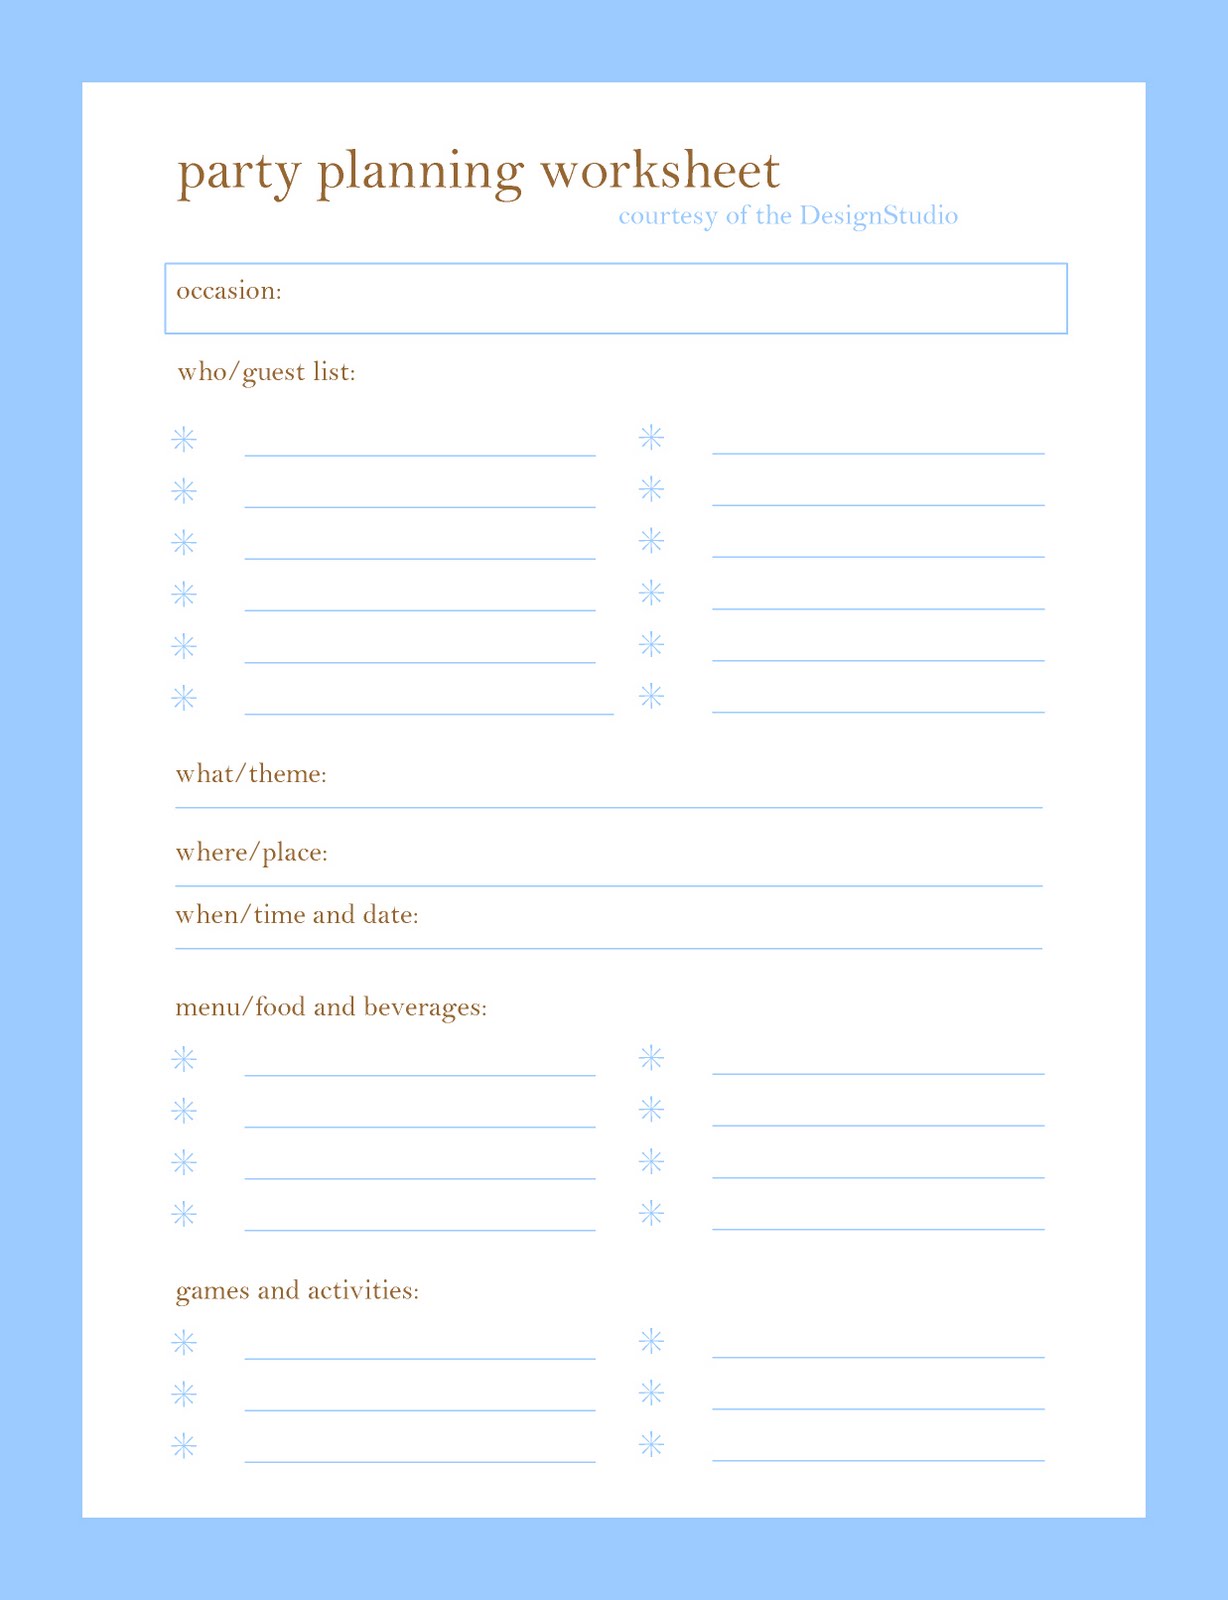 party-planning-sheet-a-little-simplistic-but-useful-event-planning